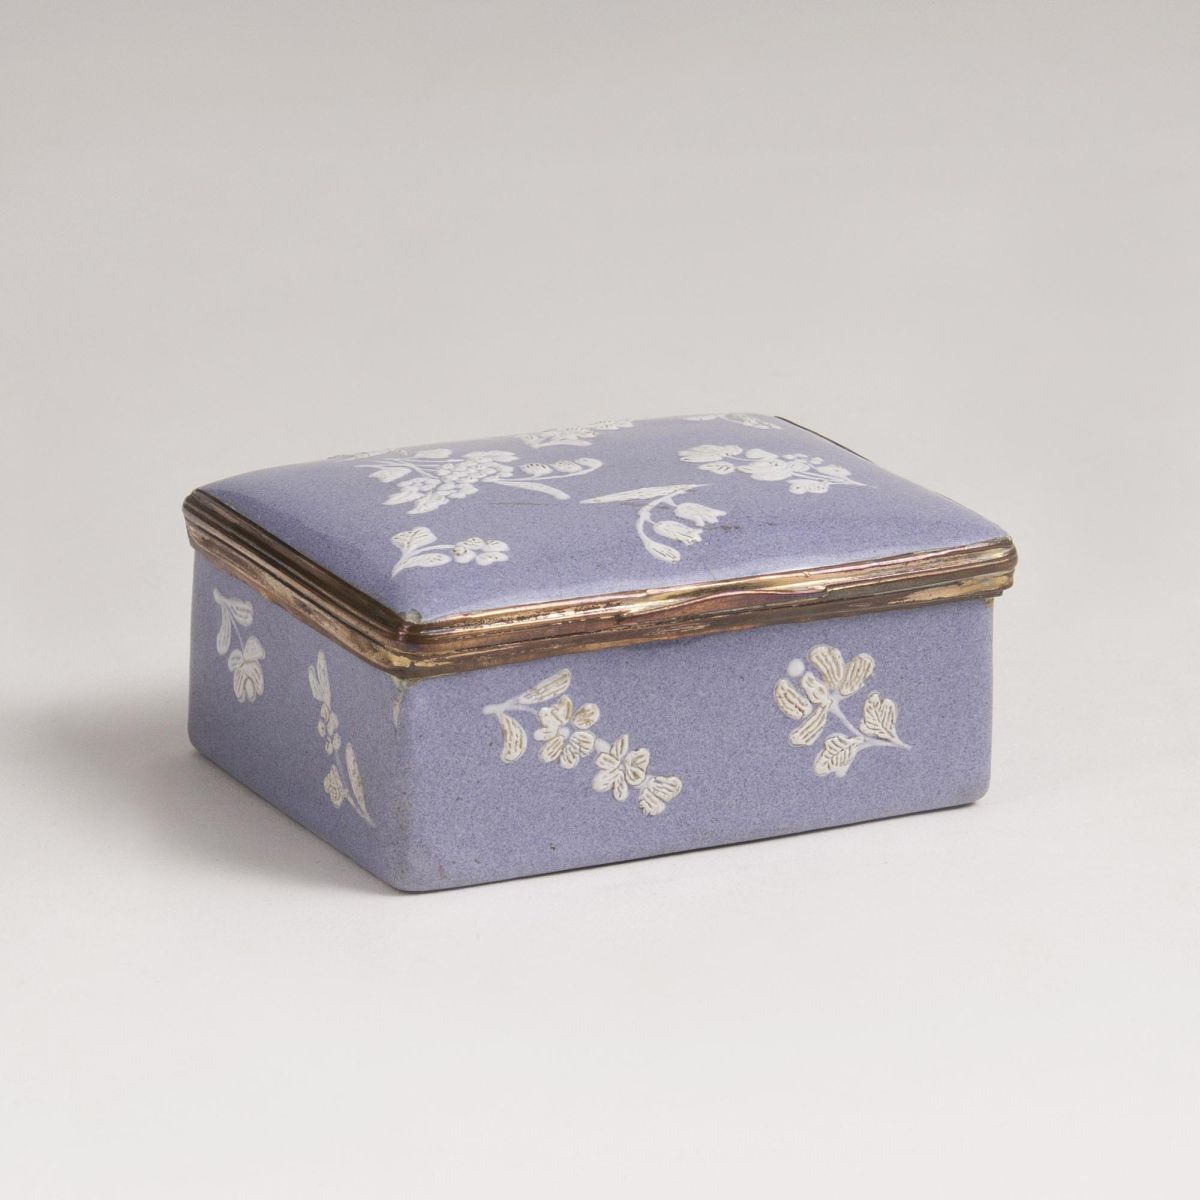 An Enamel Snuff Box with Fine Flower Relief - image 2